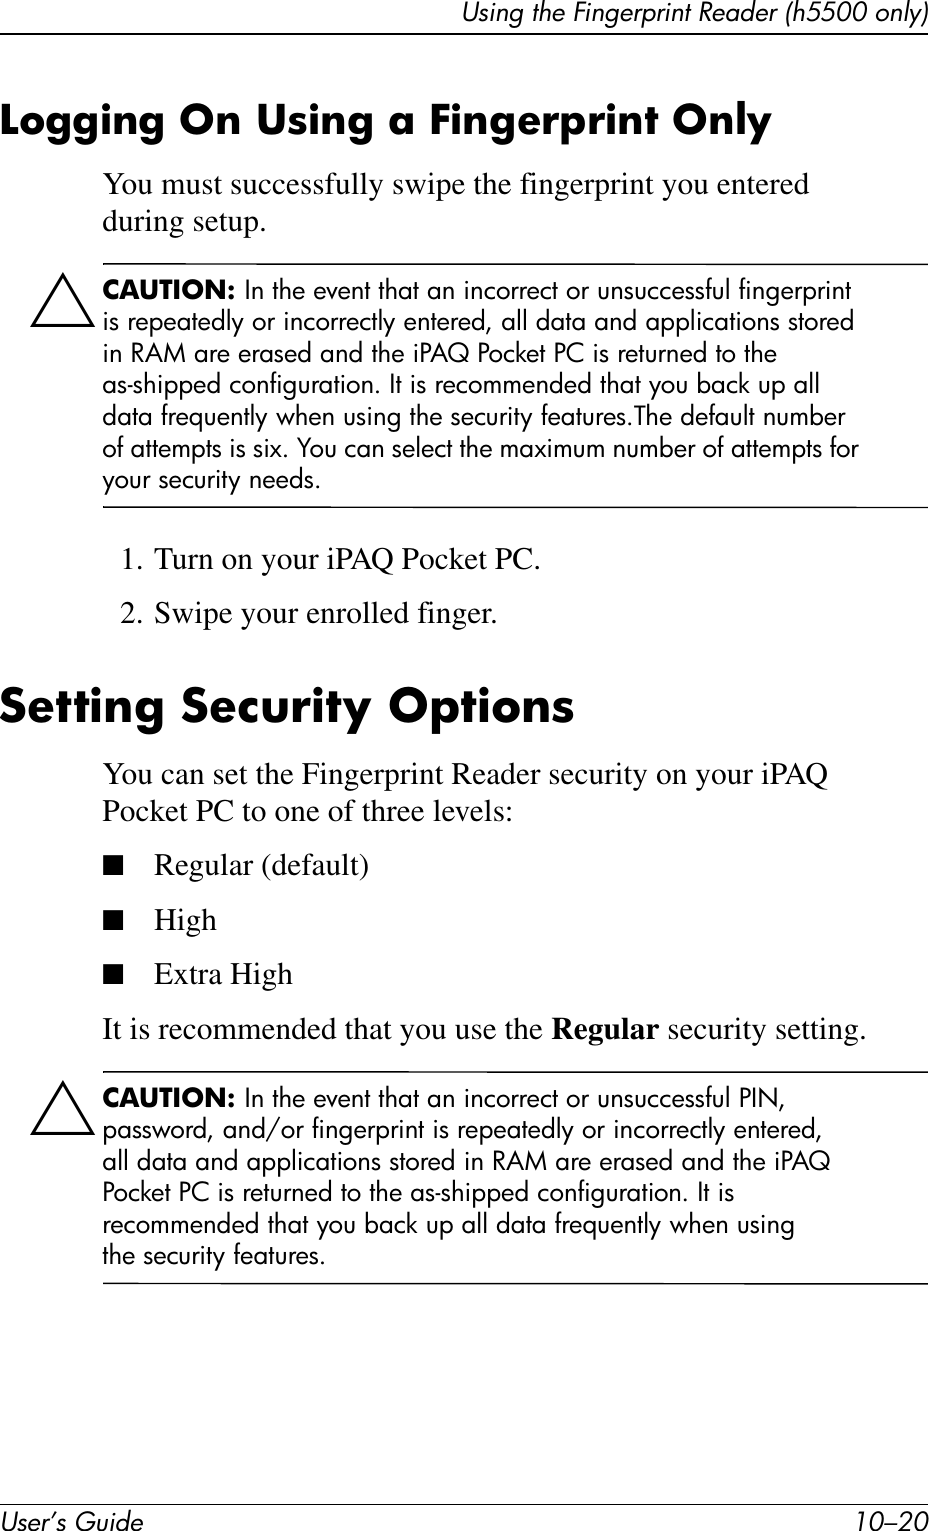 User’s Guide 10–20Using the Fingerprint Reader (h5500 only)Logging On Using a Fingerprint OnlyYou must successfully swipe the fingerprint you entered during setup.ÄCAUTION: In the event that an incorrect or unsuccessful fingerprint is repeatedly or incorrectly entered, all data and applications stored in RAM are erased and the iPAQ Pocket PC is returned to the as-shipped configuration. It is recommended that you back up all data frequently when using the security features.The default number of attempts is six. You can select the maximum number of attempts for your security needs.1. Turn on your iPAQ Pocket PC.2. Swipe your enrolled finger.Setting Security OptionsYou can set the Fingerprint Reader security on your iPAQ Pocket PC to one of three levels:■Regular (default)■High■Extra HighIt is recommended that you use the Regular security setting.ÄCAUTION: In the event that an incorrect or unsuccessful PIN, password, and/or fingerprint is repeatedly or incorrectly entered, all data and applications stored in RAM are erased and the iPAQ Pocket PC is returned to the as-shipped configuration. It is recommended that you back up all data frequently when using the security features.